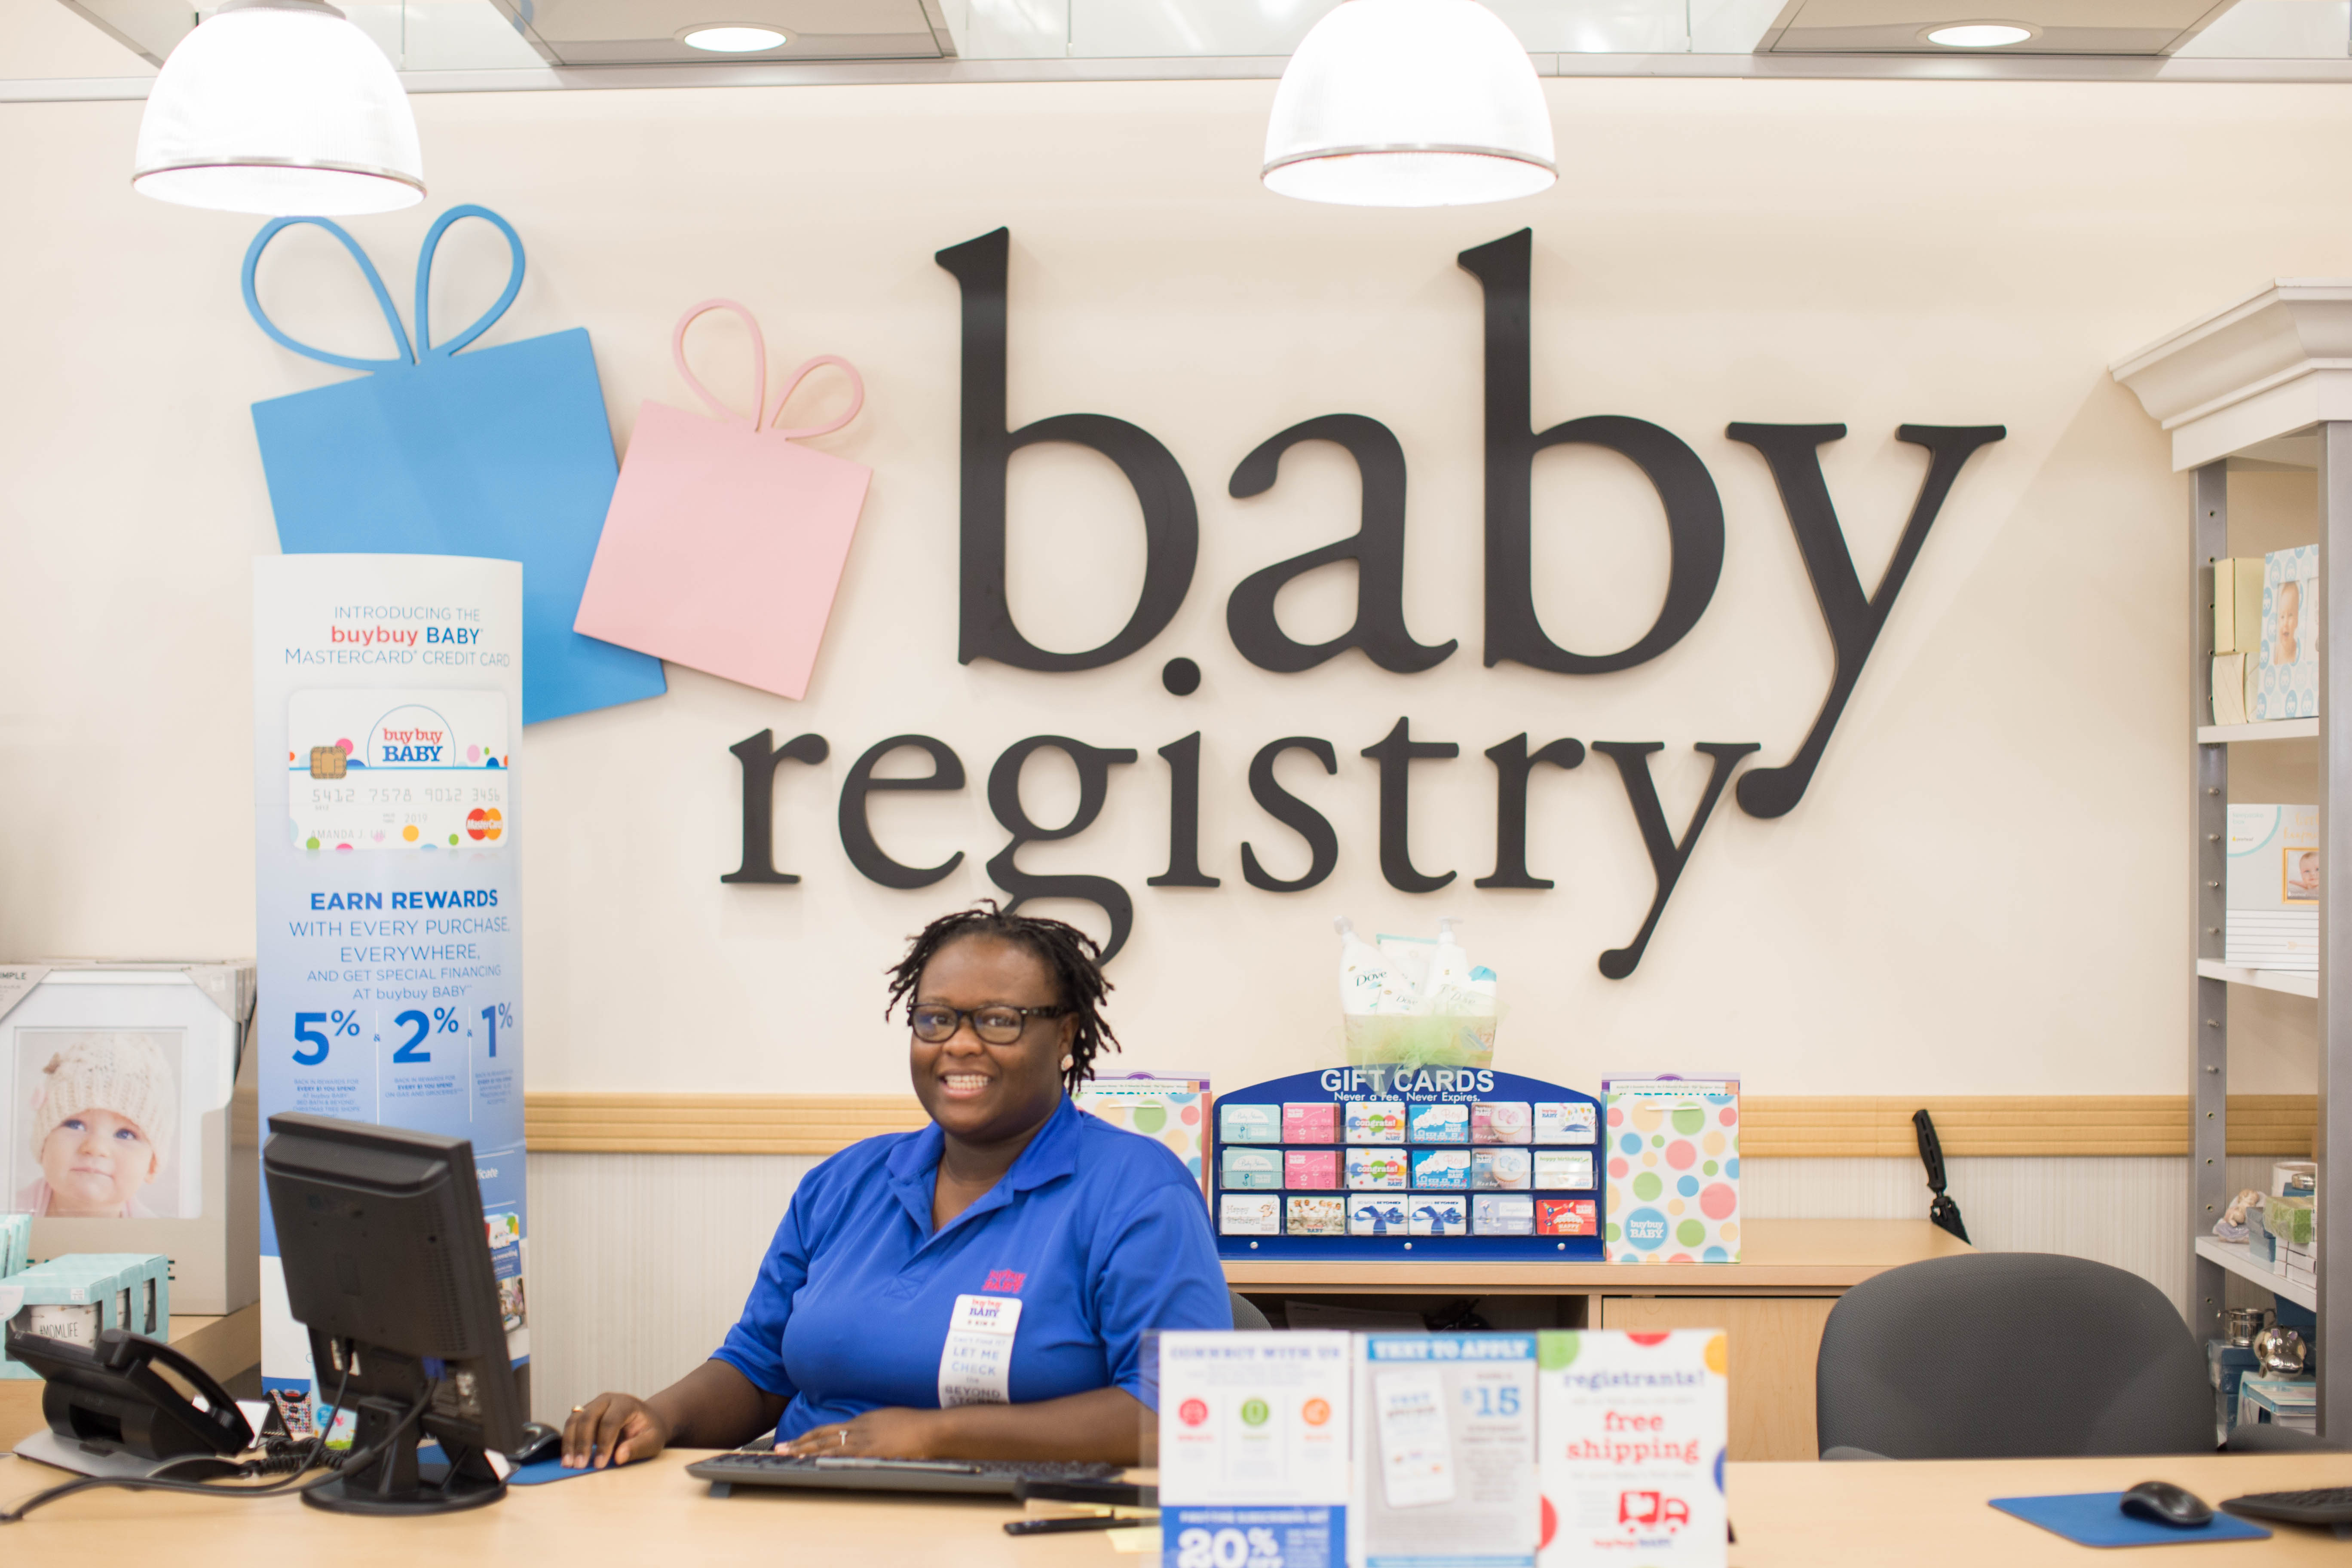 What to Expect When Registering for Baby